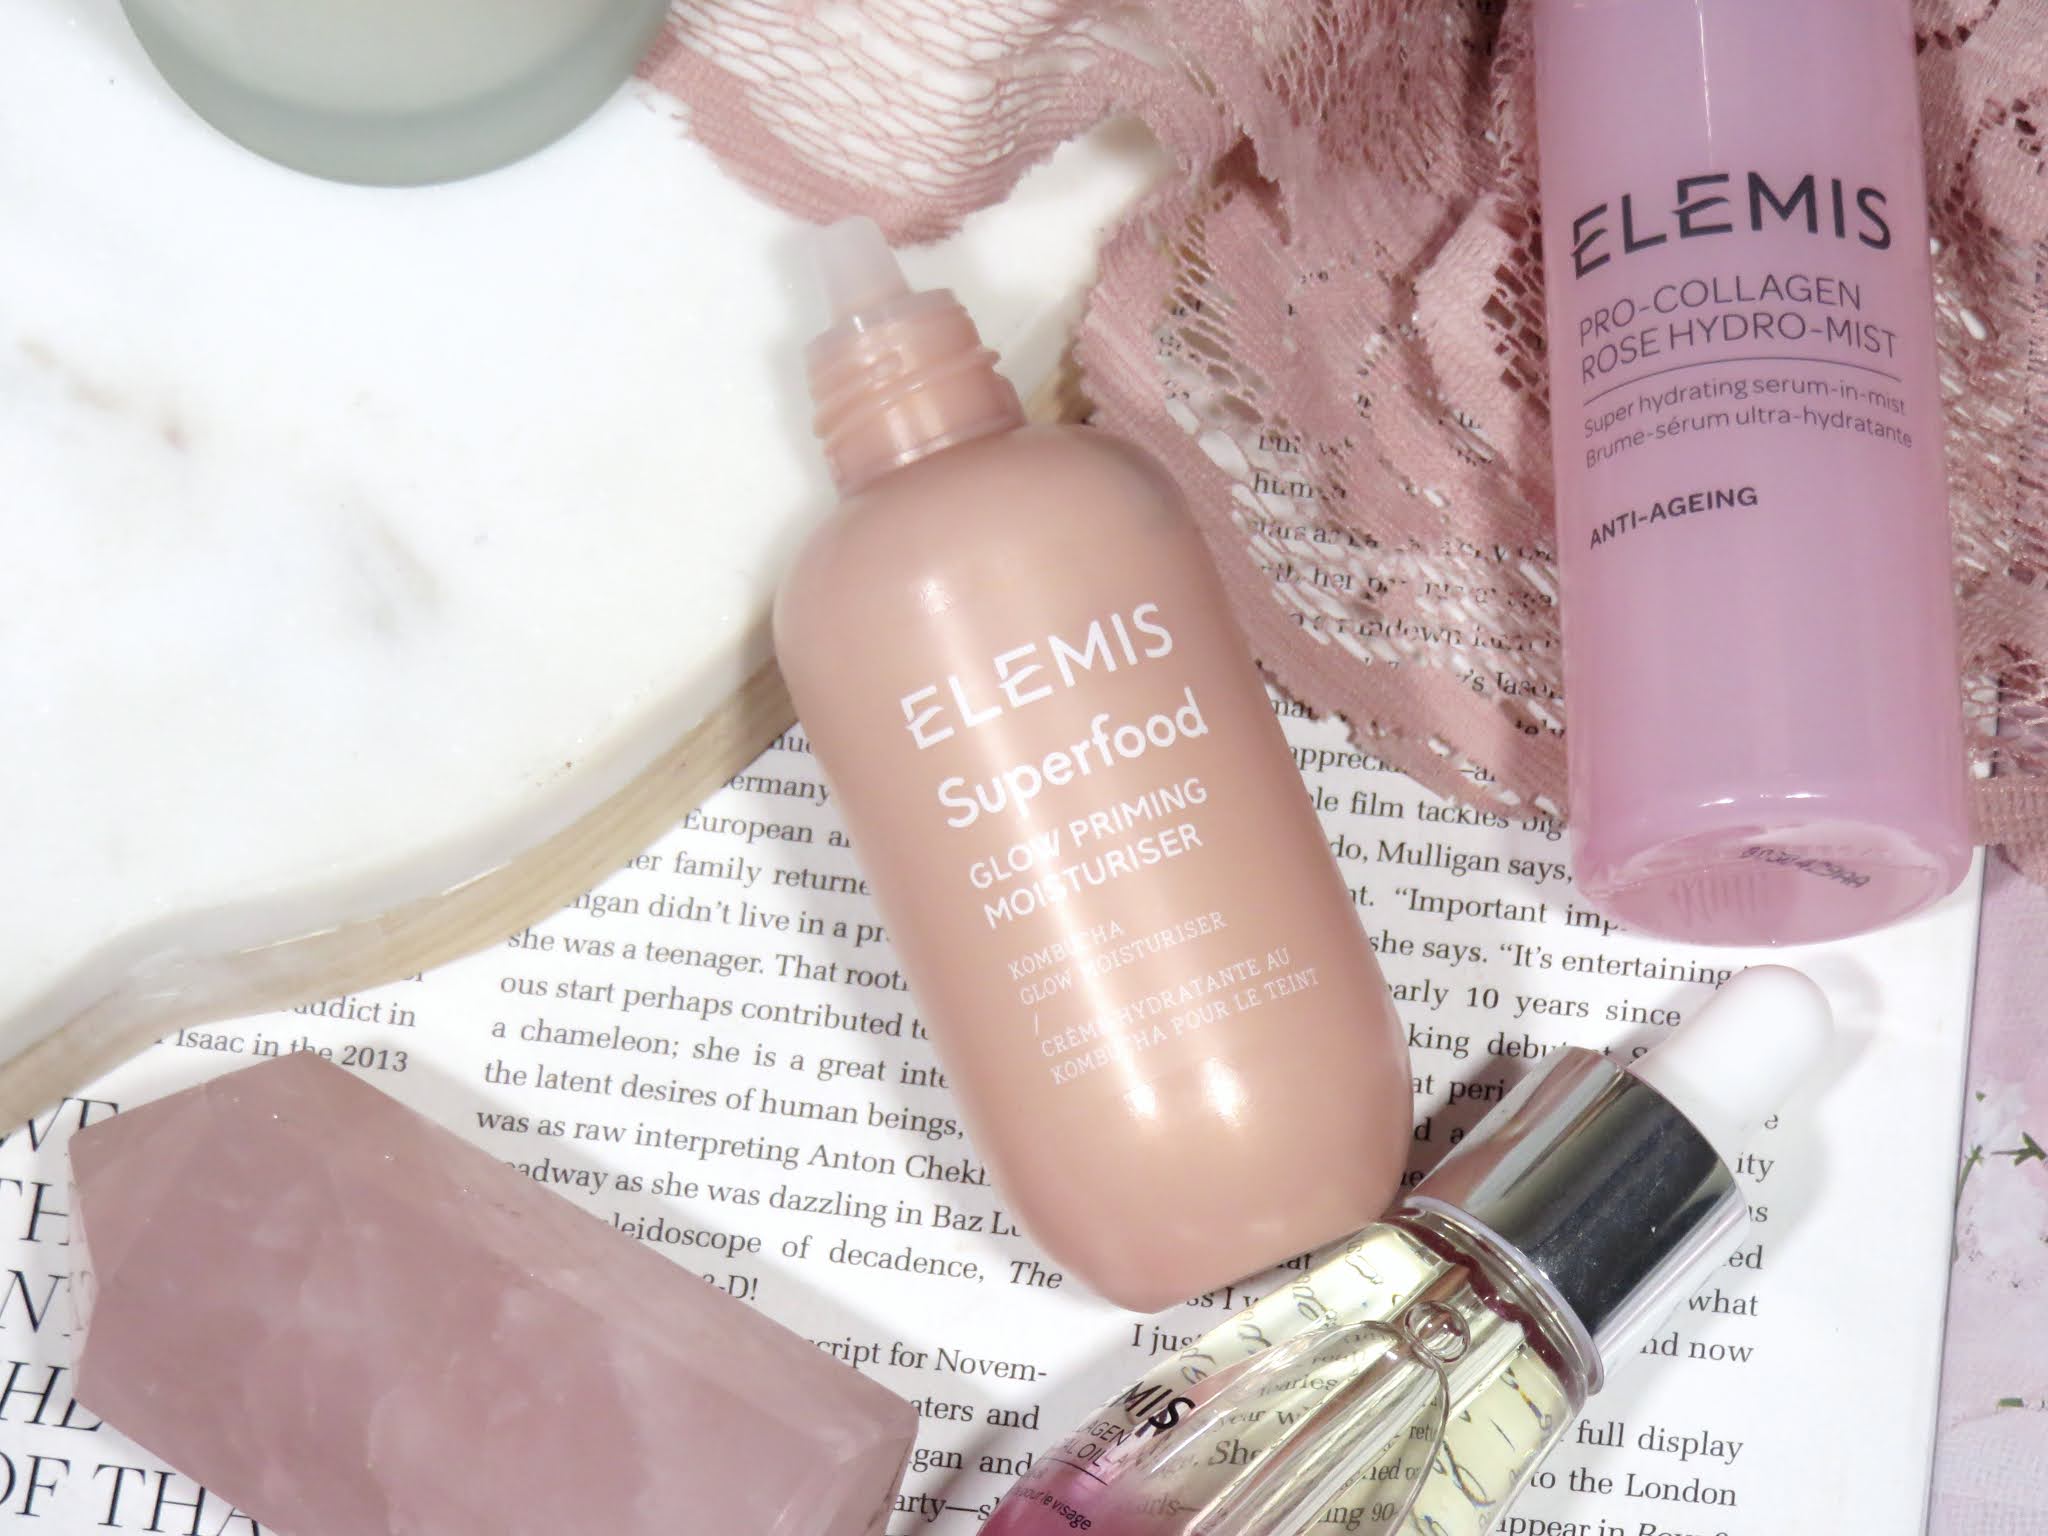 Elemis Superfood Glow Priming Moisturizer Review and Swatches